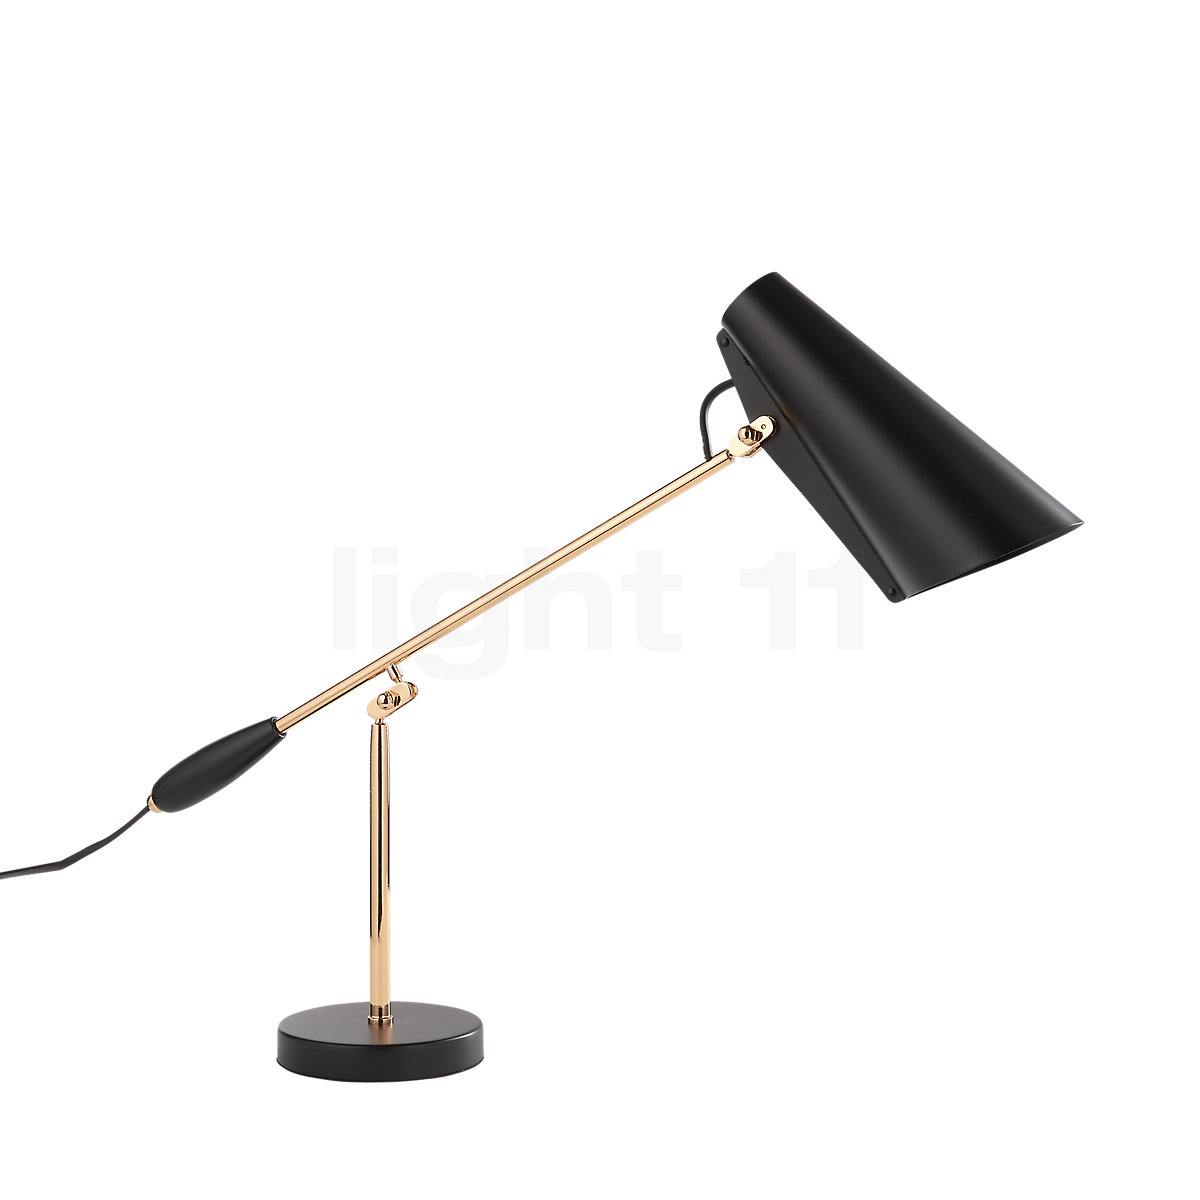 Northern Birdy Table Lamp At Light11 Eu, Black And Brass Table Lamp